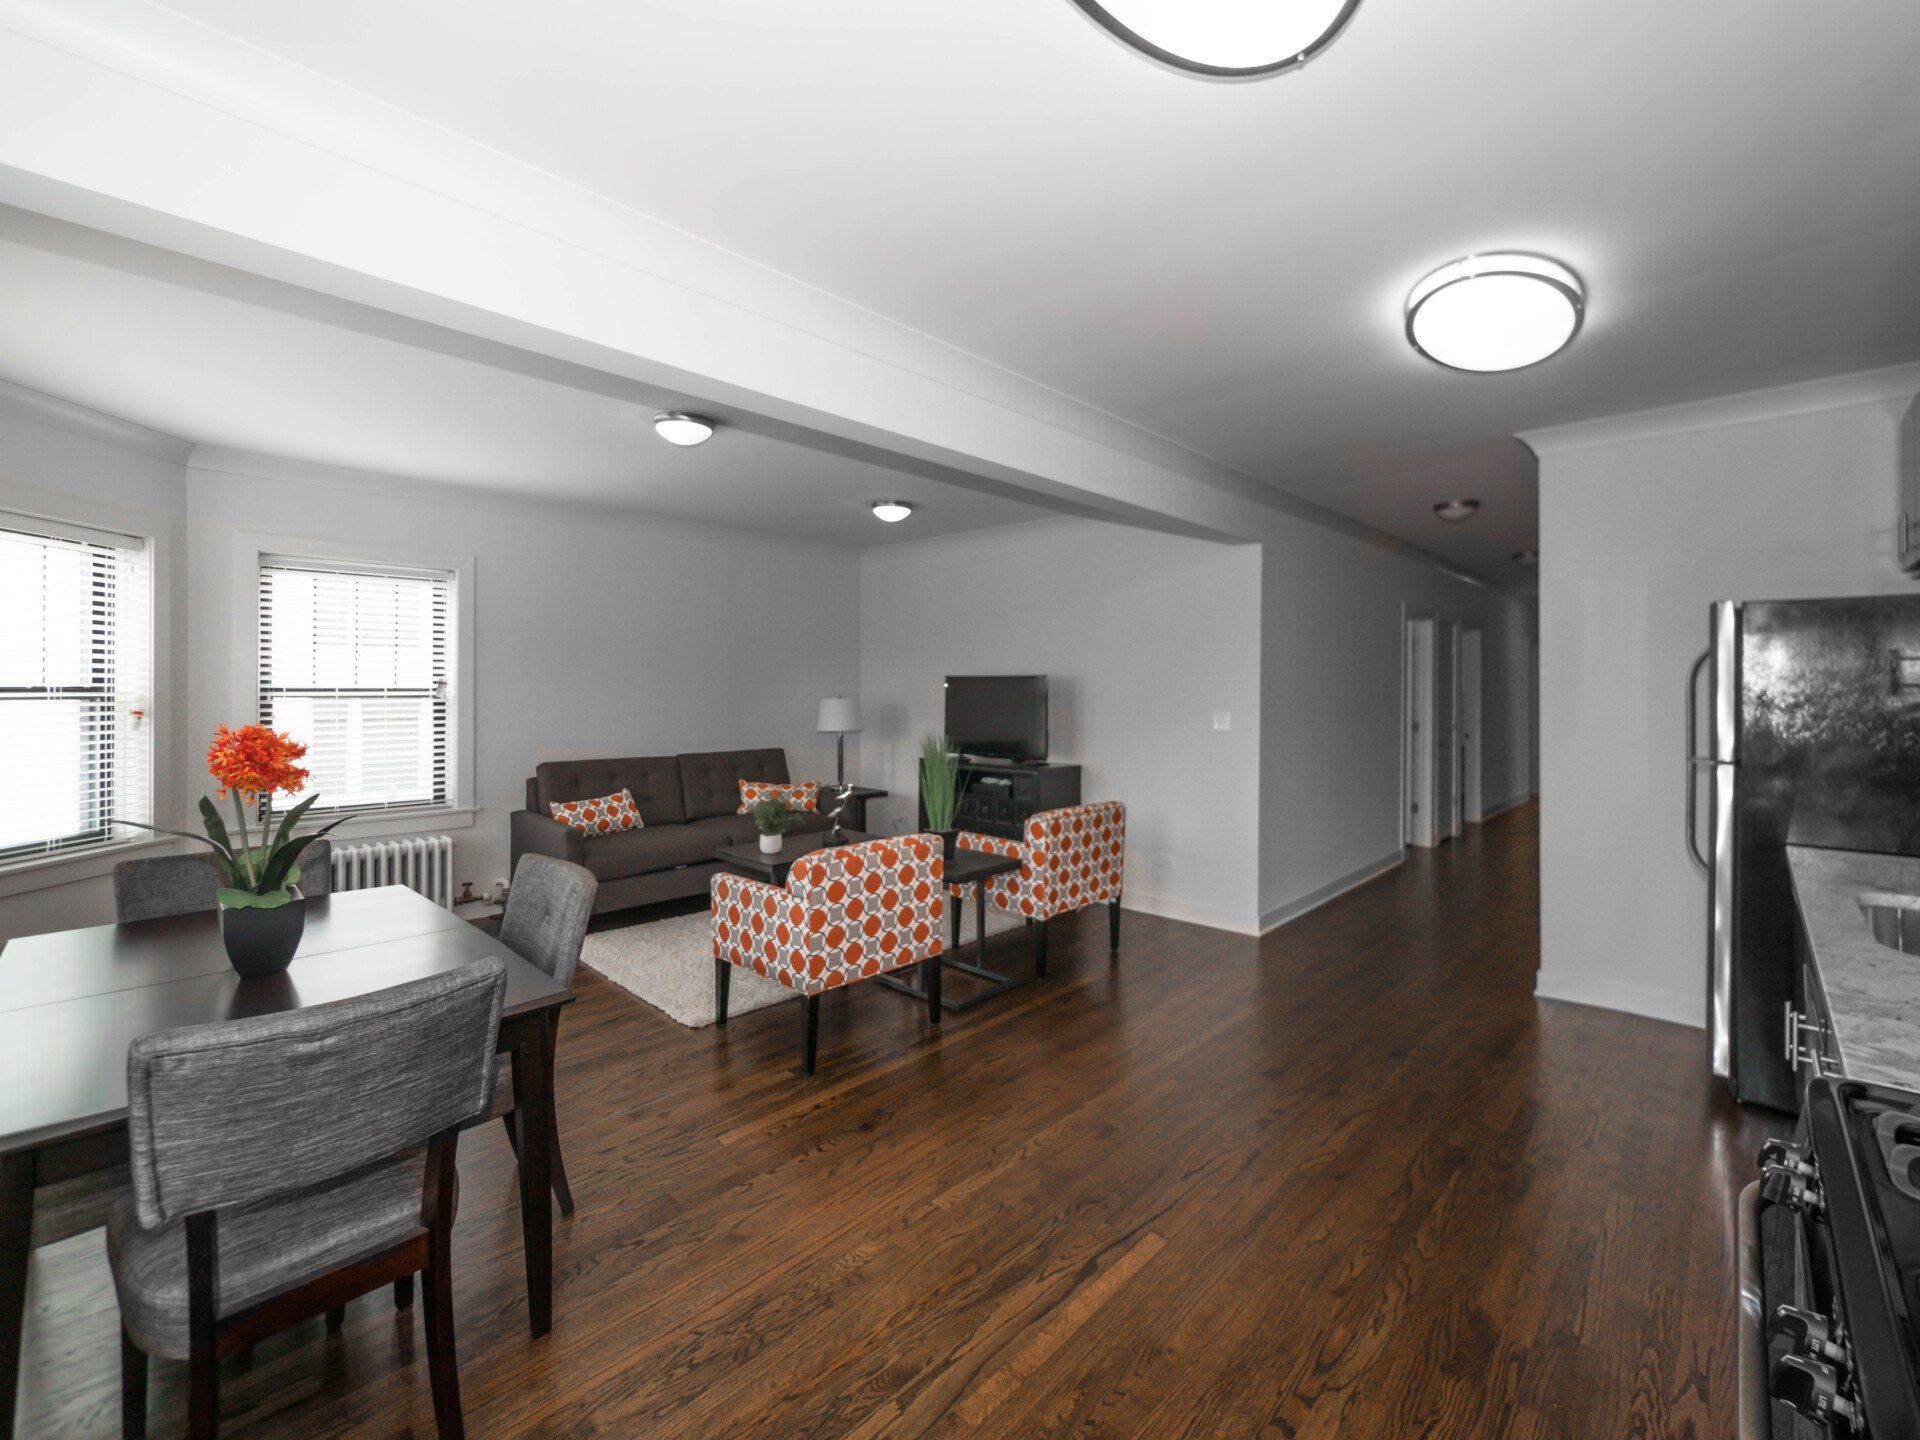 Open apartment floor plan with a couch, chairs, a table, and a refrigerator.